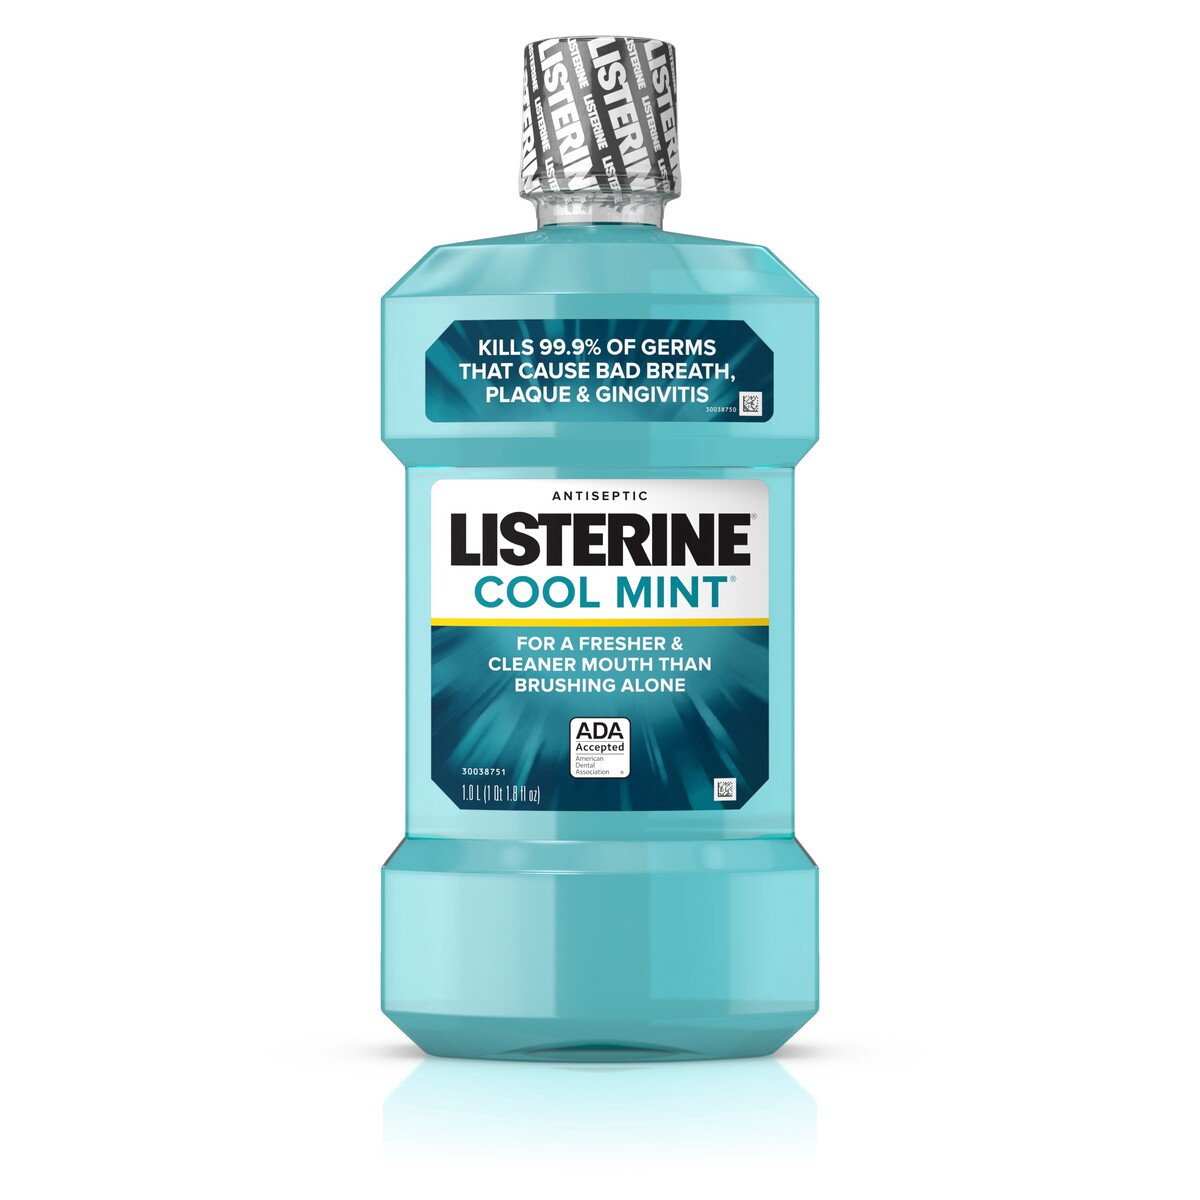 slide 5 of 6, Listerine Cool Mint Antiseptic Mouthwash, Daily Oral Rinse Kills 99% of Germs that Cause Bad Breath, Plaque and Gingivitis for a Fresher, Cleaner Mouth, Cool Mint Flavor, 1.0 L, 1 L